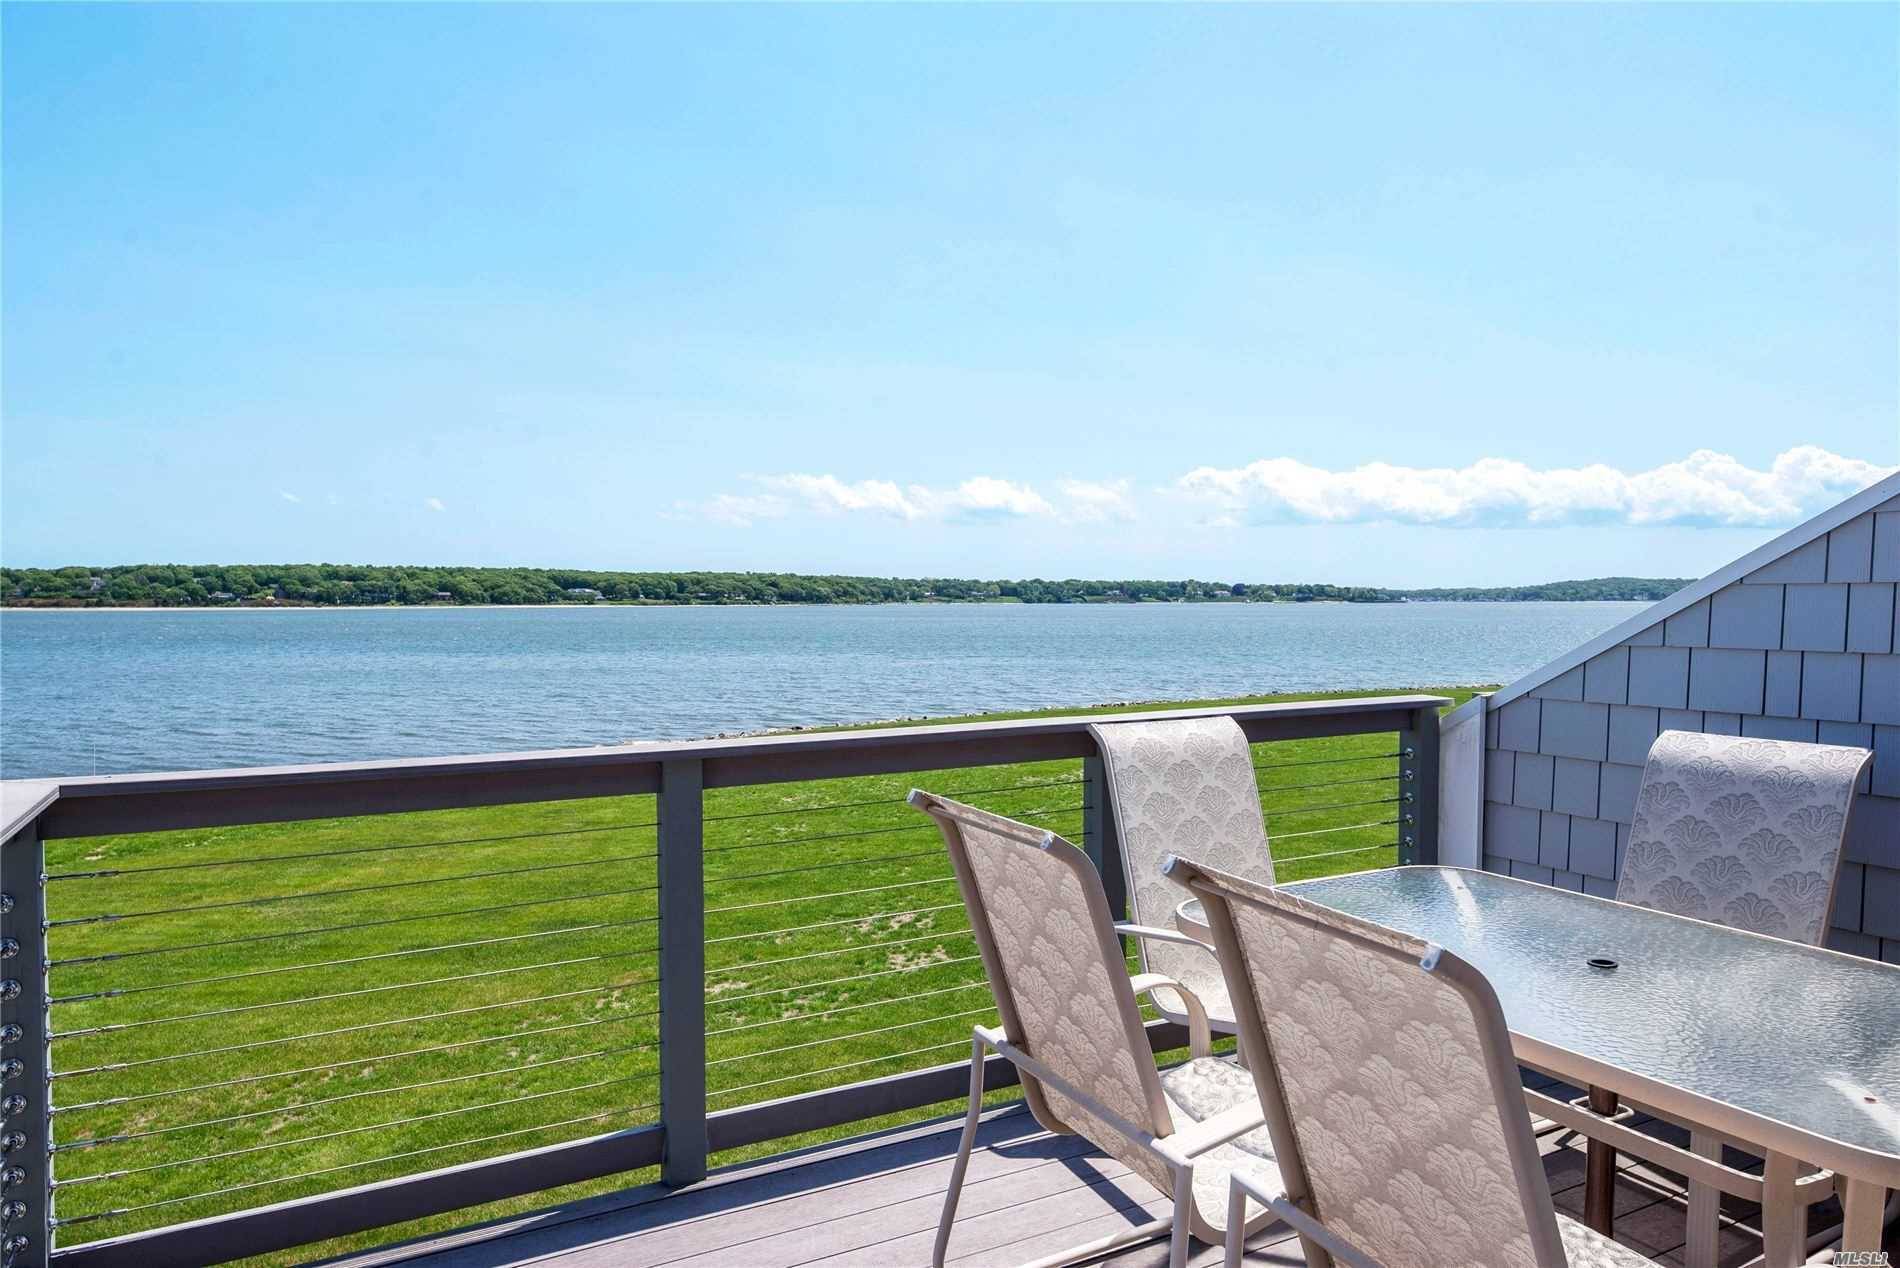 Direct Bay Front Condo with forever views East, South West over Peconic Bay, the South Fork and Shelter Island.